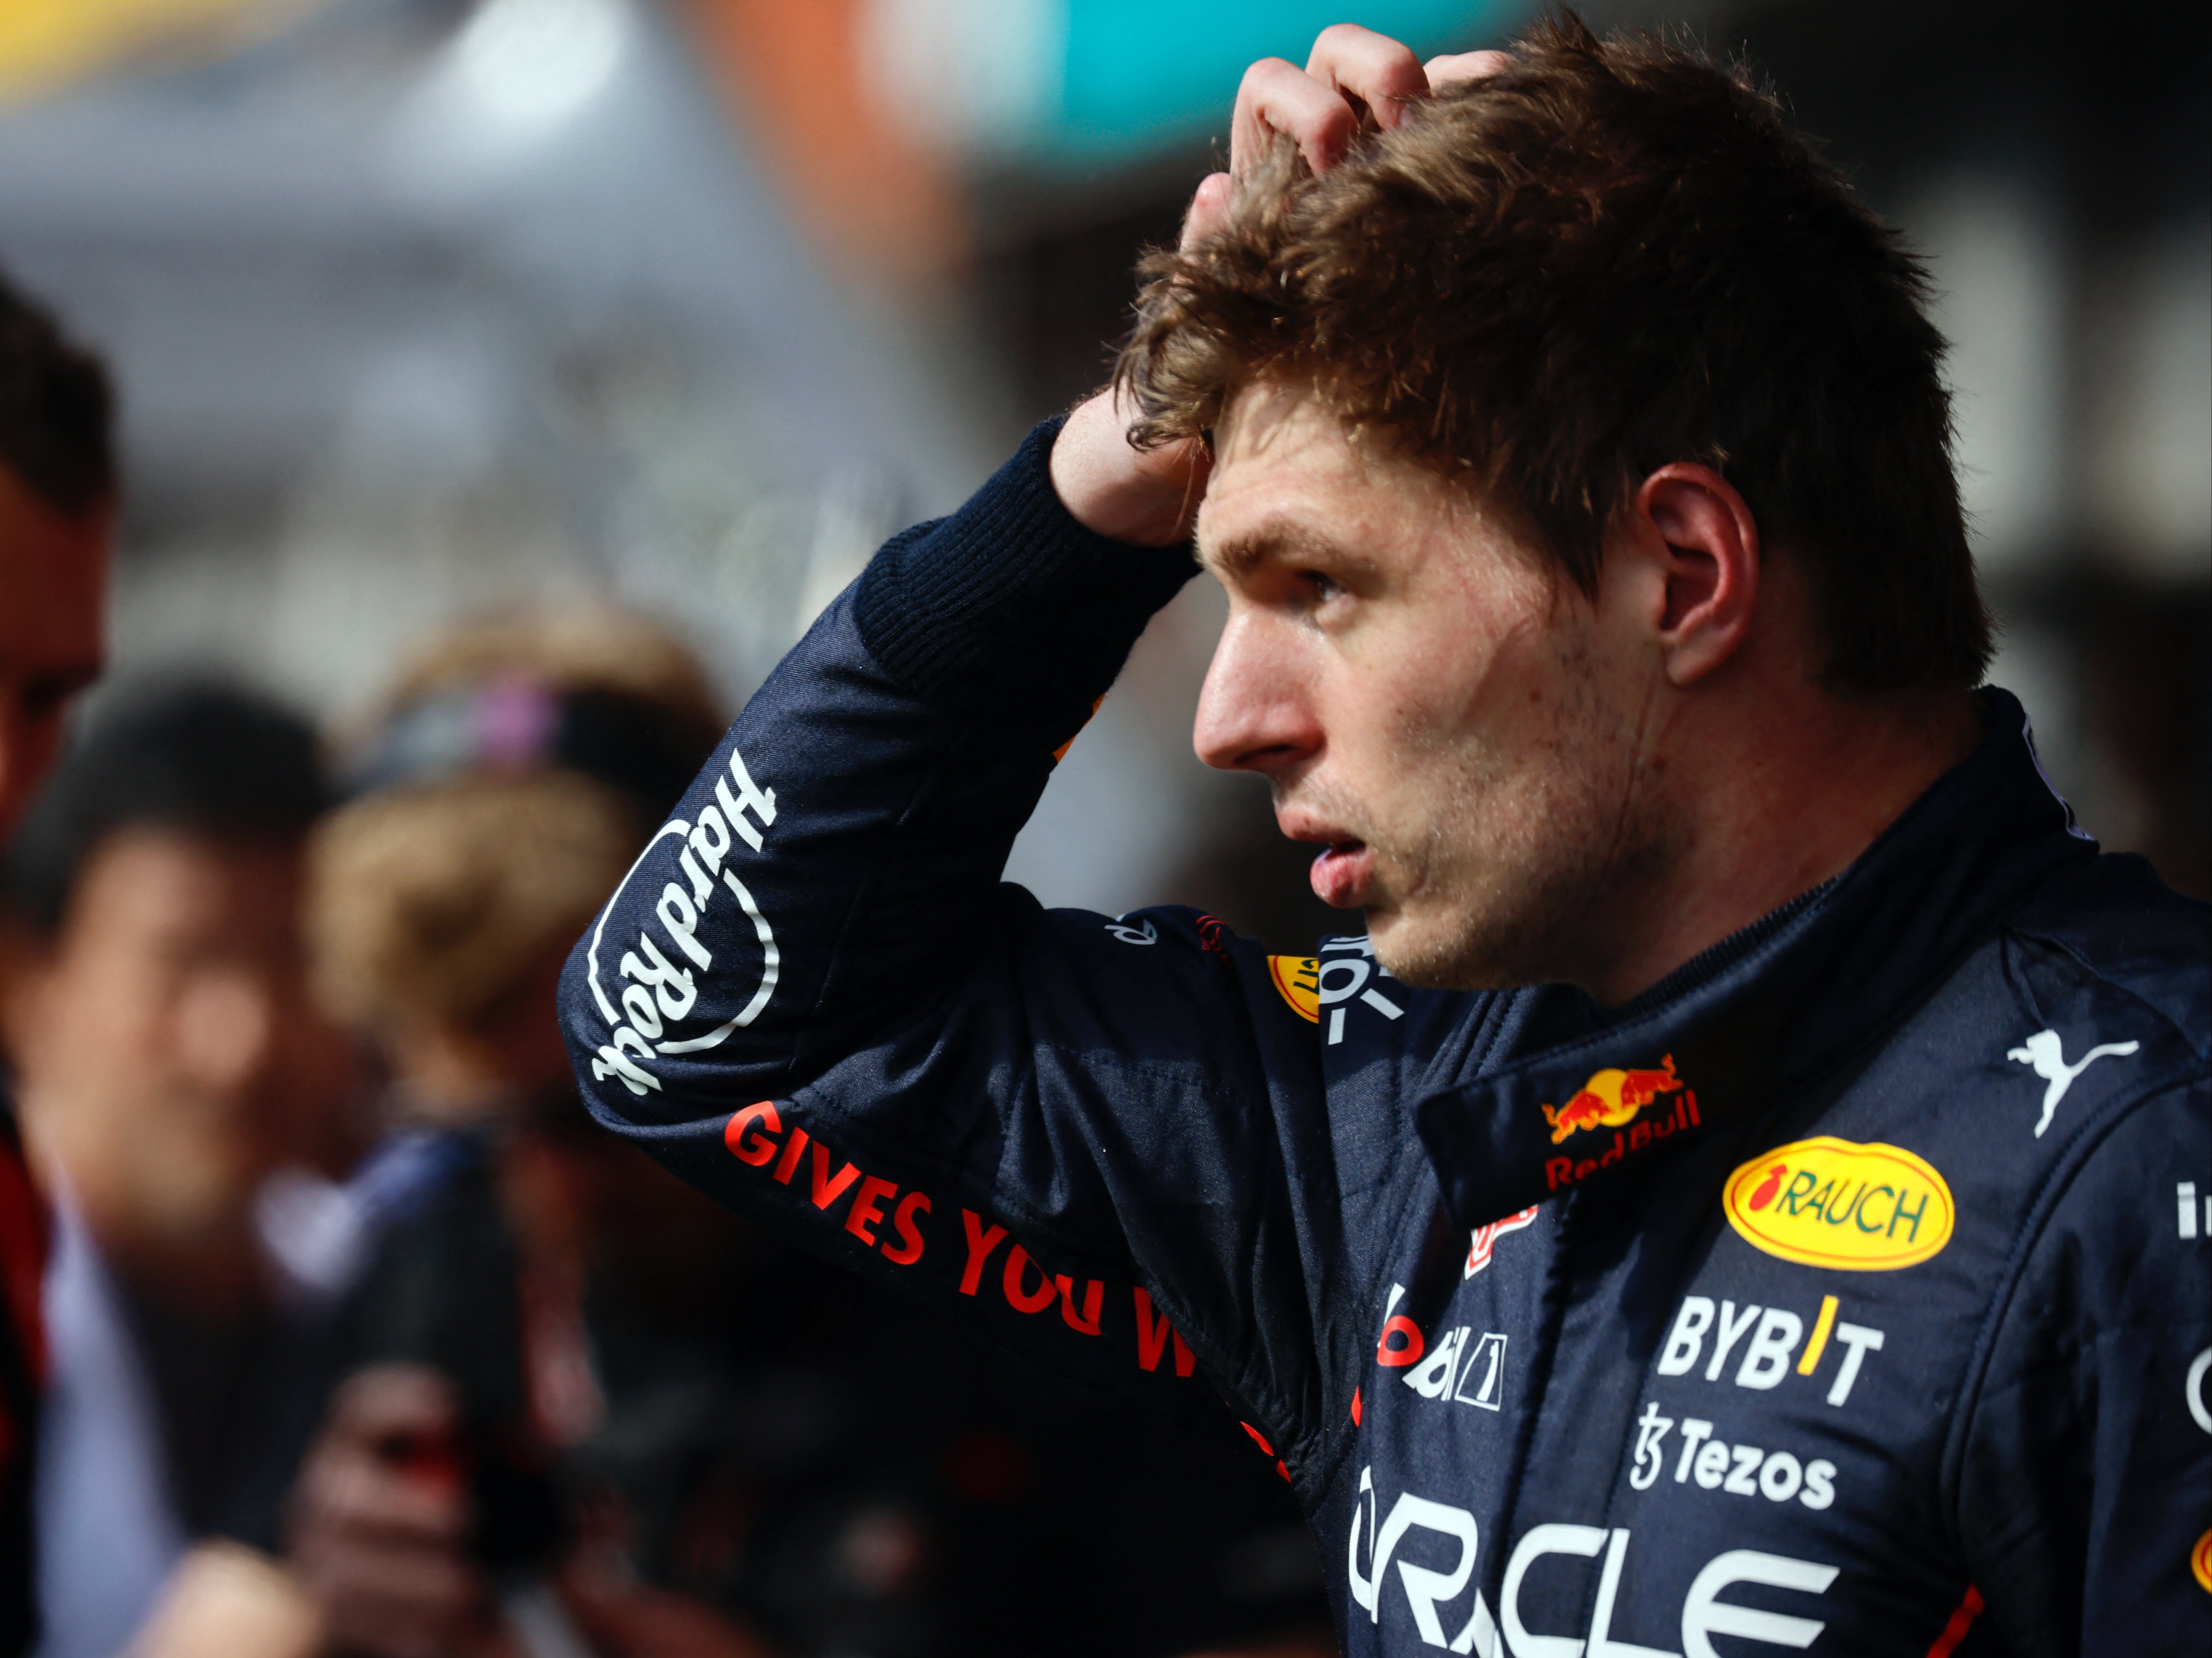 Max Verstappen has a 109-point lead in the World Championship